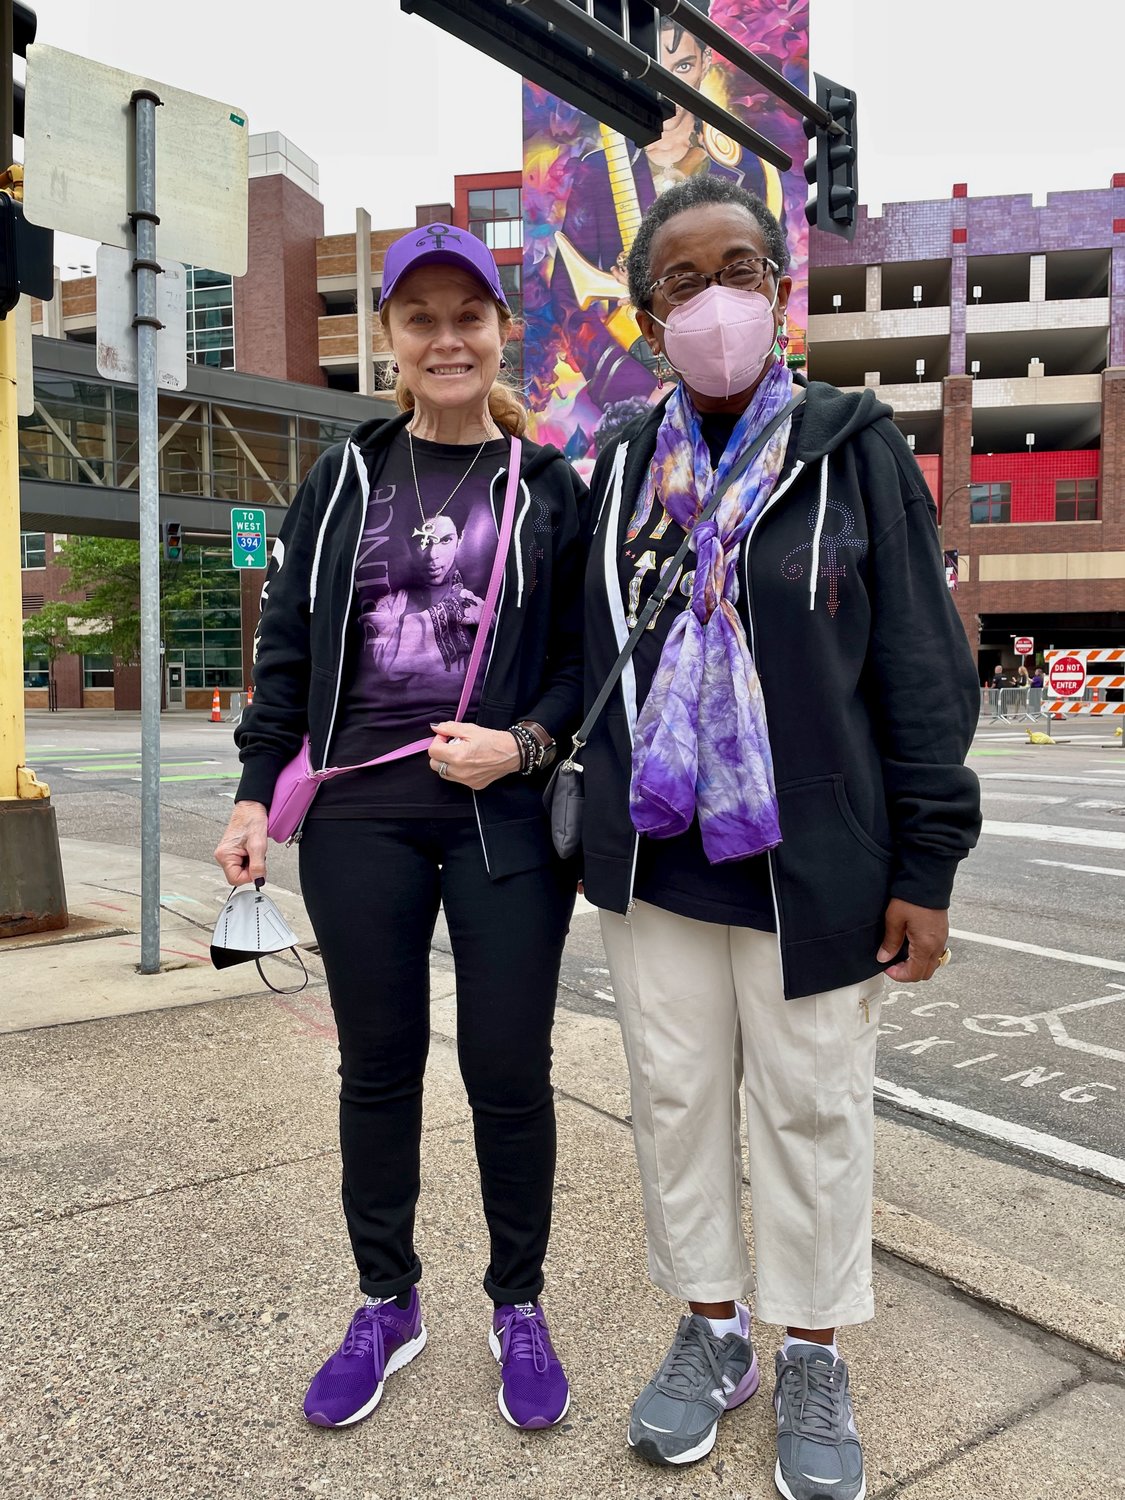 New Yorker visitors Dorothy Billis and Twila Perry view the new mural on their annual Prince pilgrimage. (Photo by Susan Schaefer)